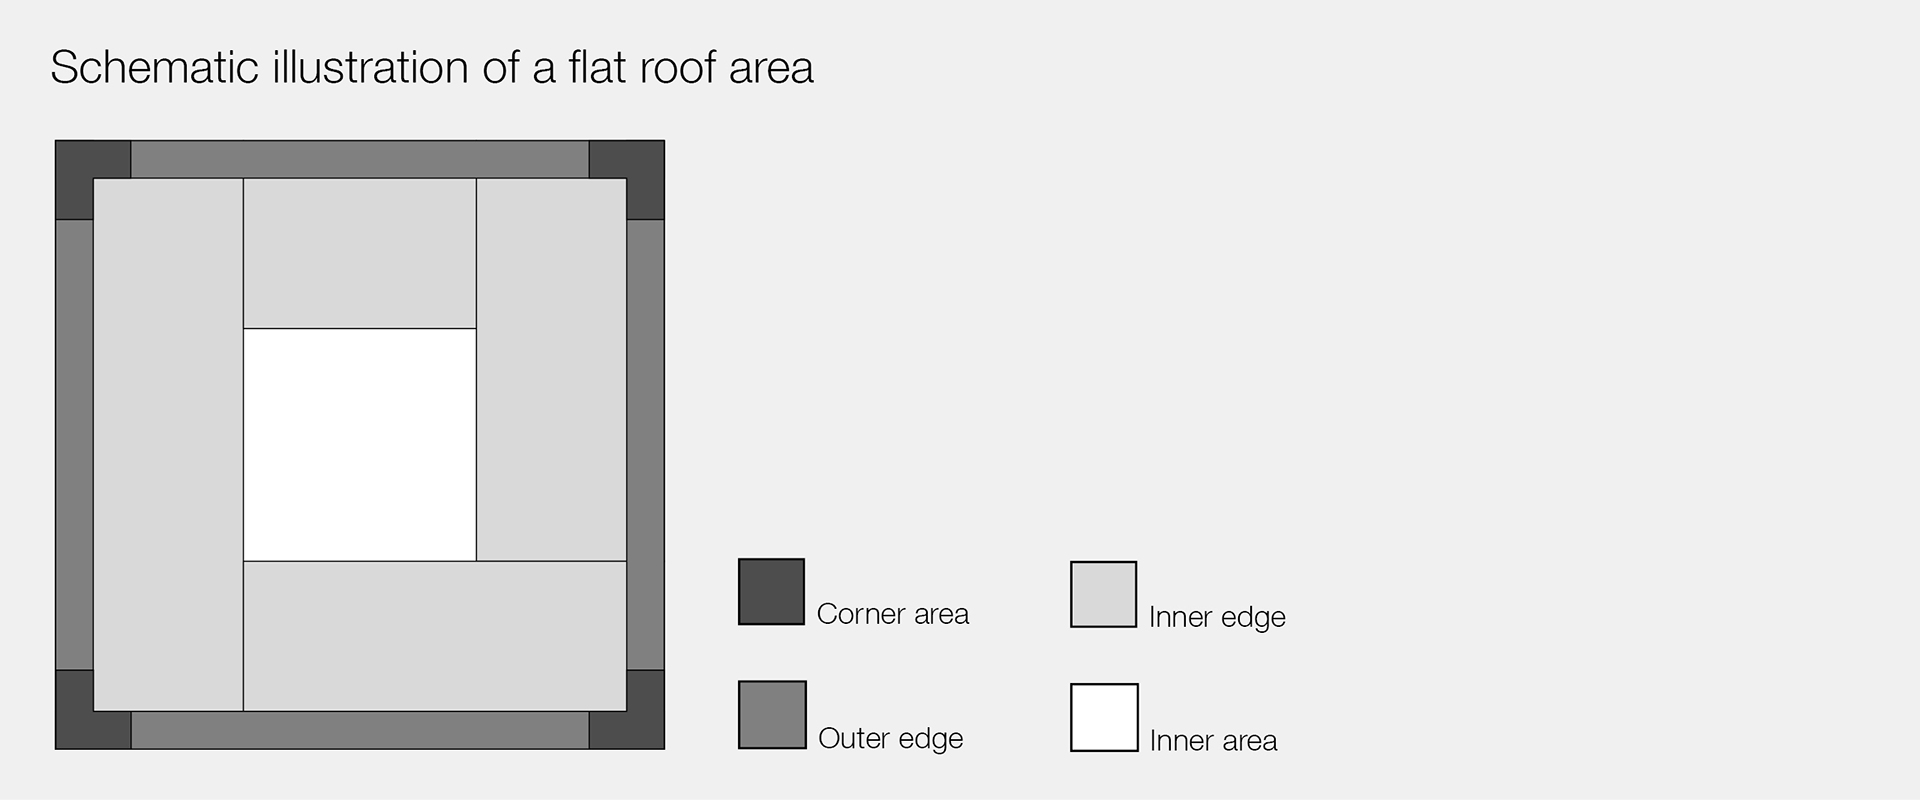 Schematic illustration of a flat roof area